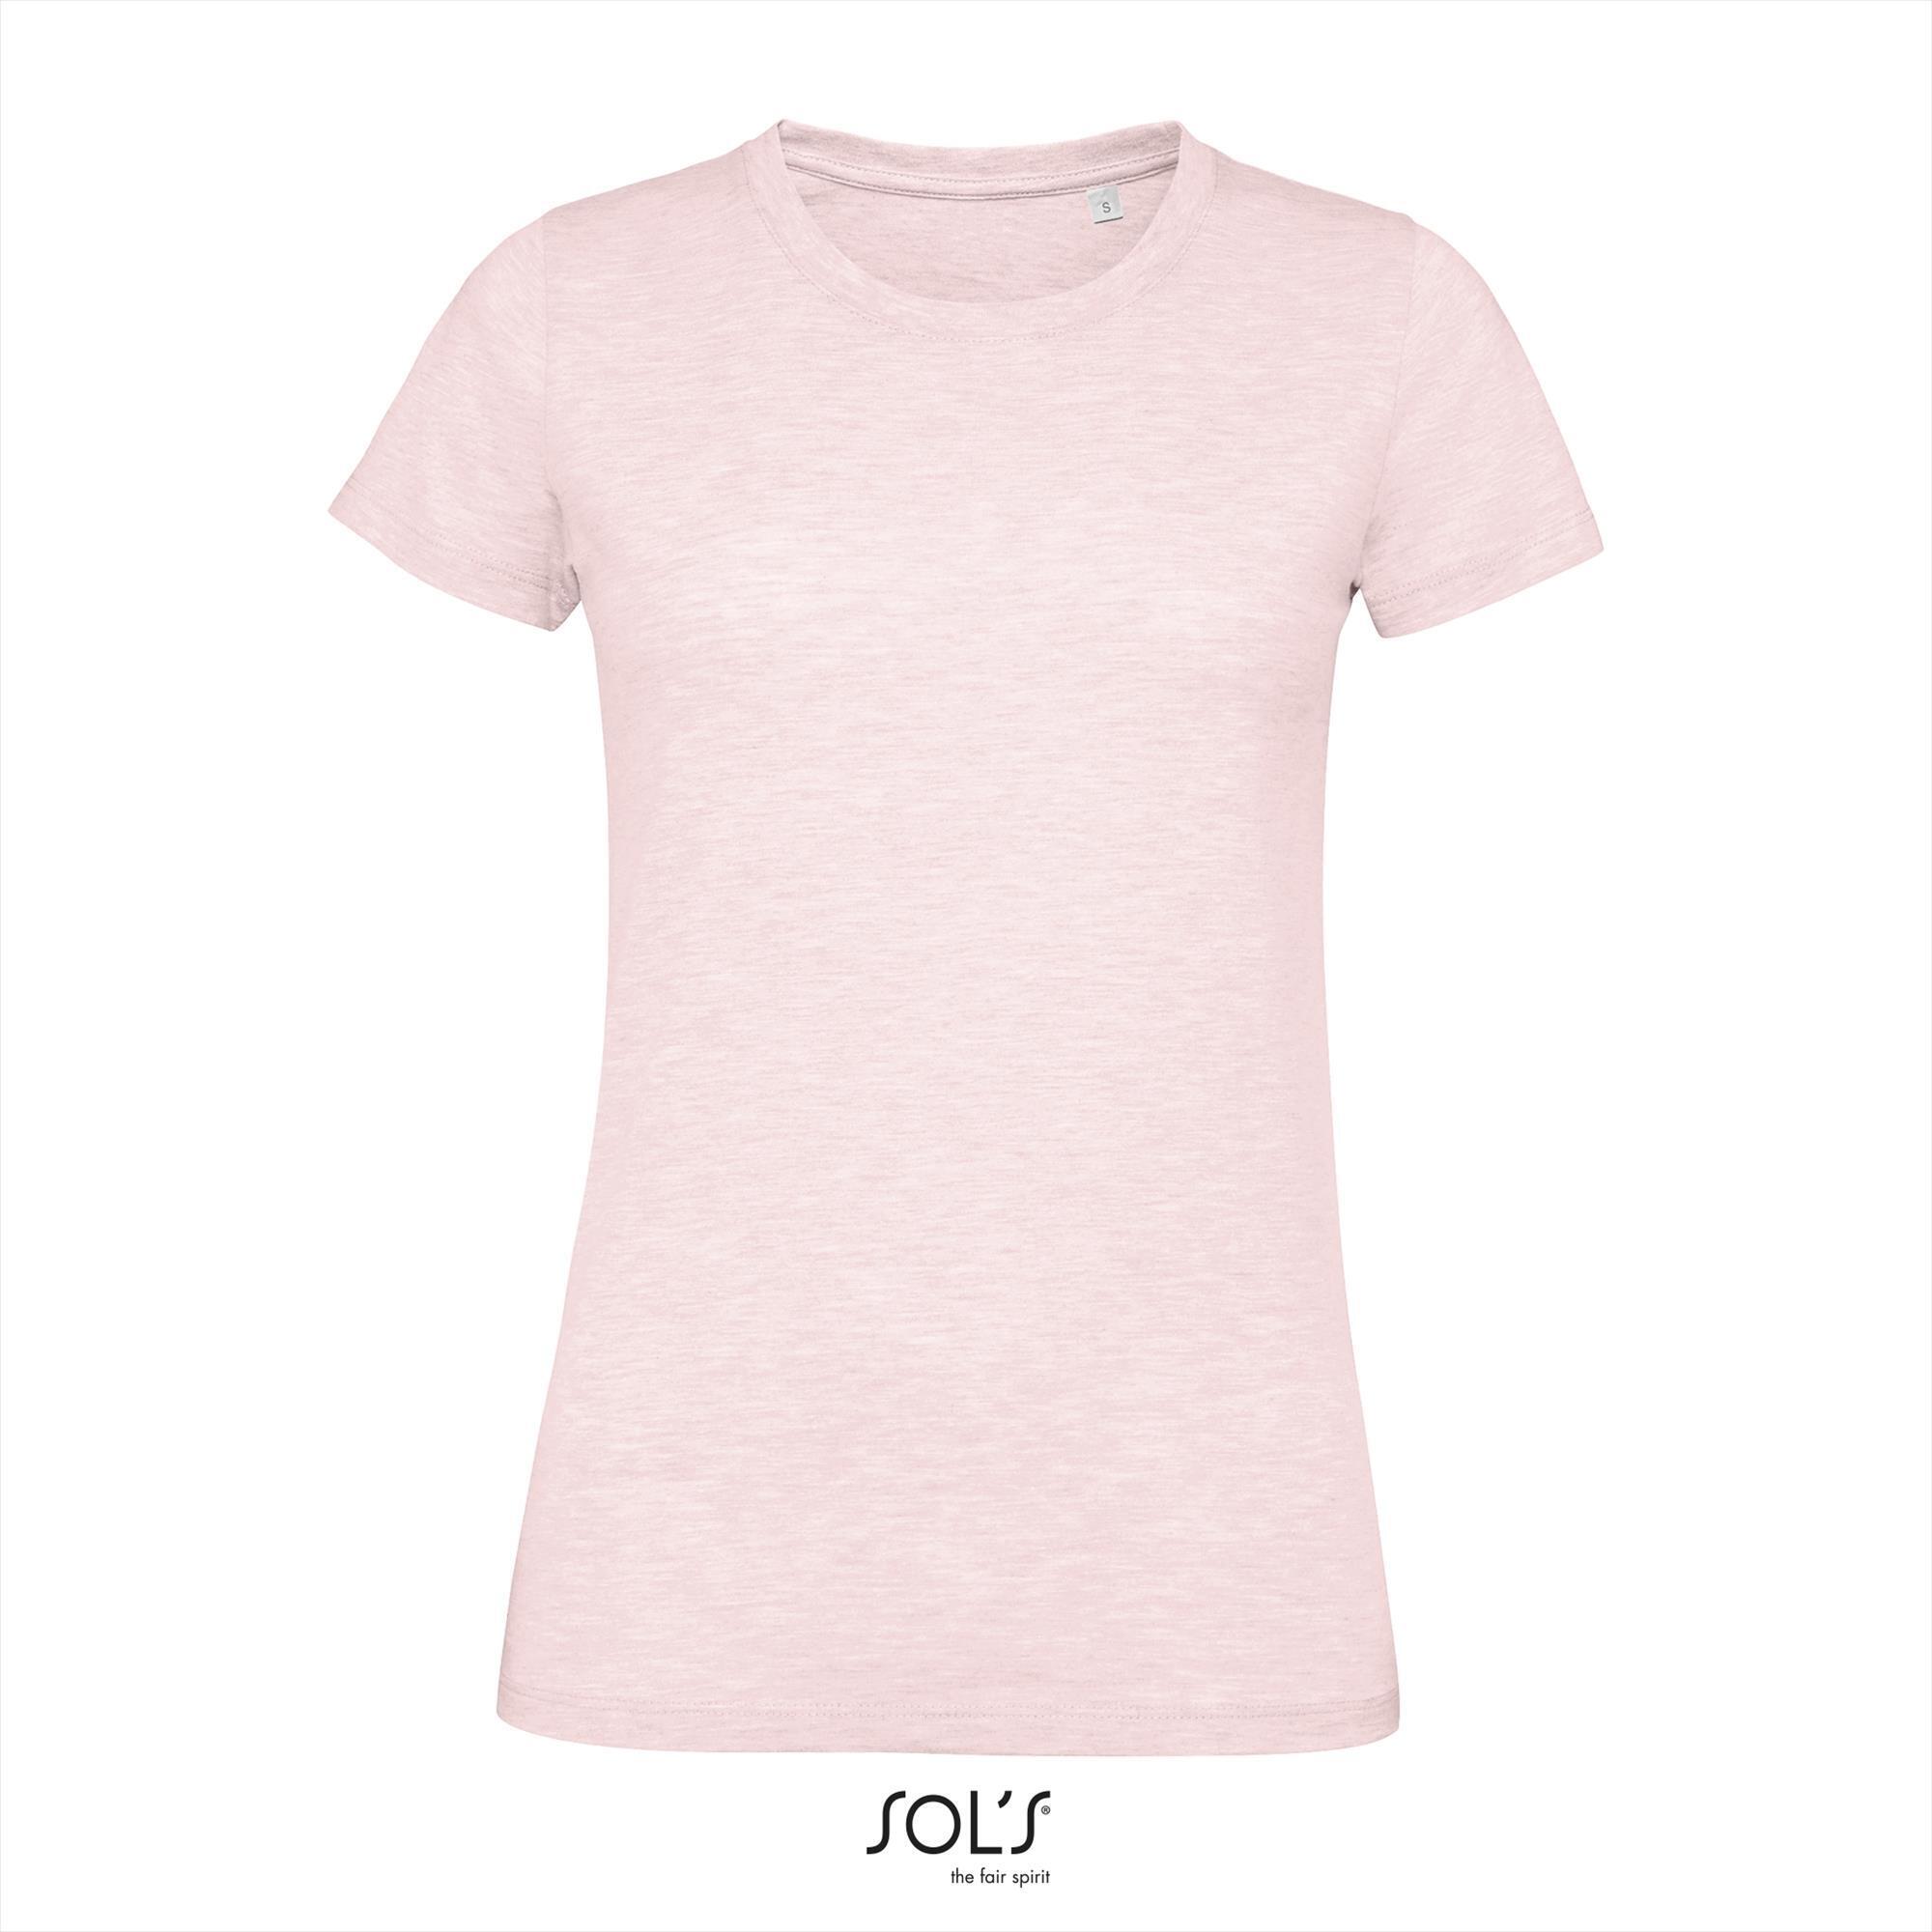 T-shirt Dames heather roze fitted met ronde hals